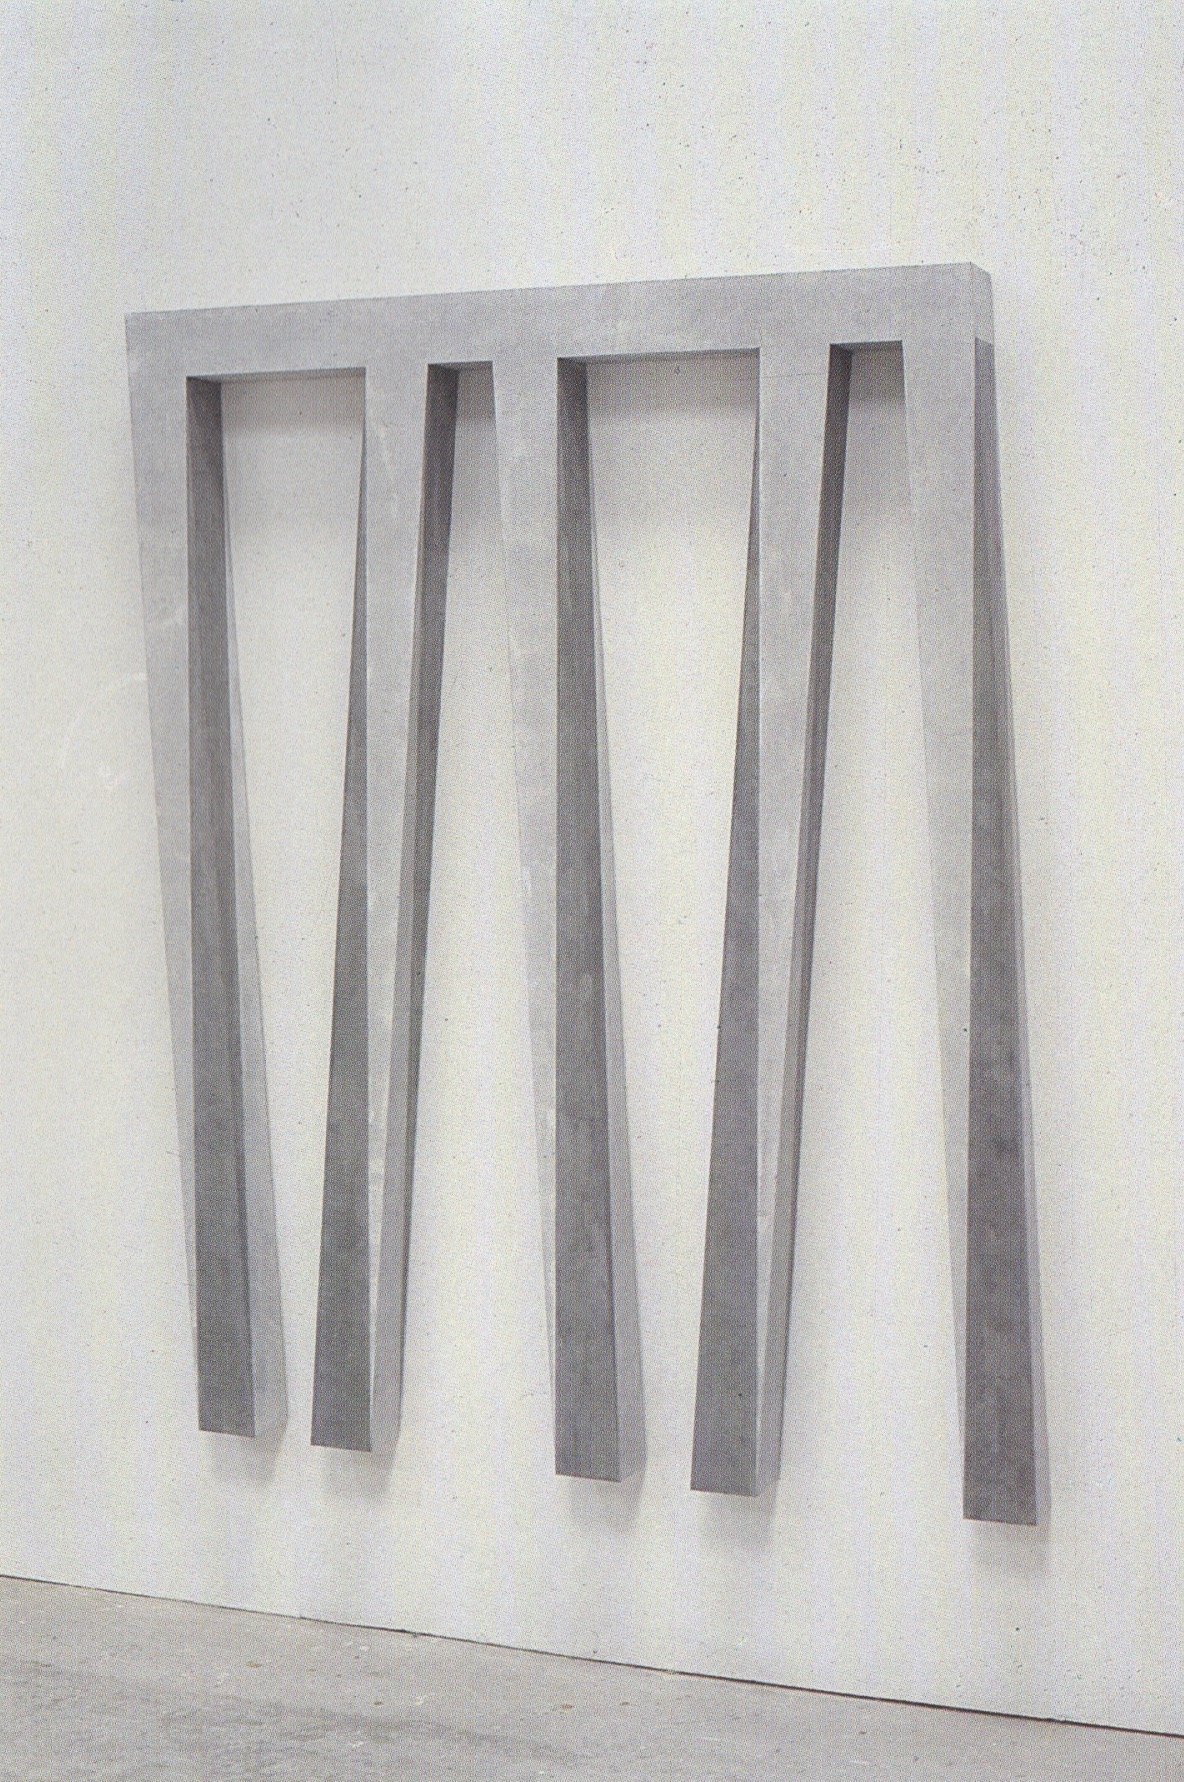 (fig. 8) &quot;untitled theme: vertical divisions&quot; (1986), acrylic, marble on plywood, 173 x 142 x 10 cm